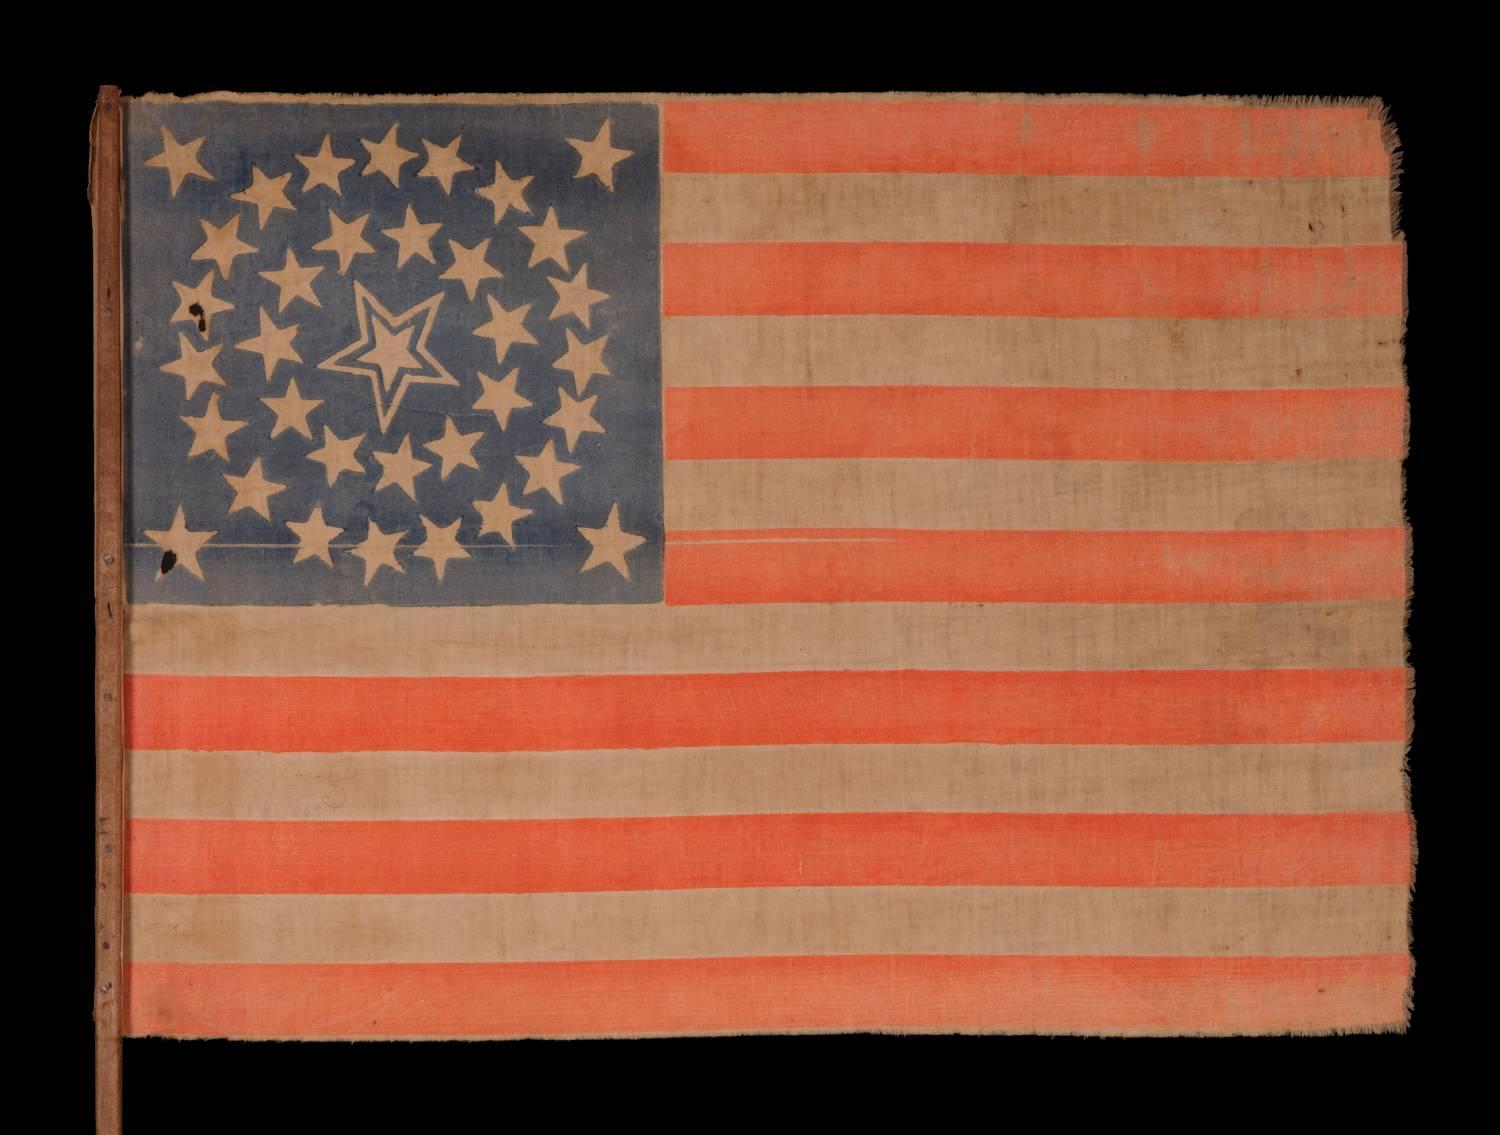 35 STARS IN A MEDALLION CONFIGURATION WITH A LARGE, HALOED CENTER STAR, ON ITS ORIGINAL WOODEN STAFF, CIVIL WAR PERIOD, WEST VIRGINIA STATEHOOD, 1863-65:

35 star American national parade flag, printed on cotton and retaining its original wooden